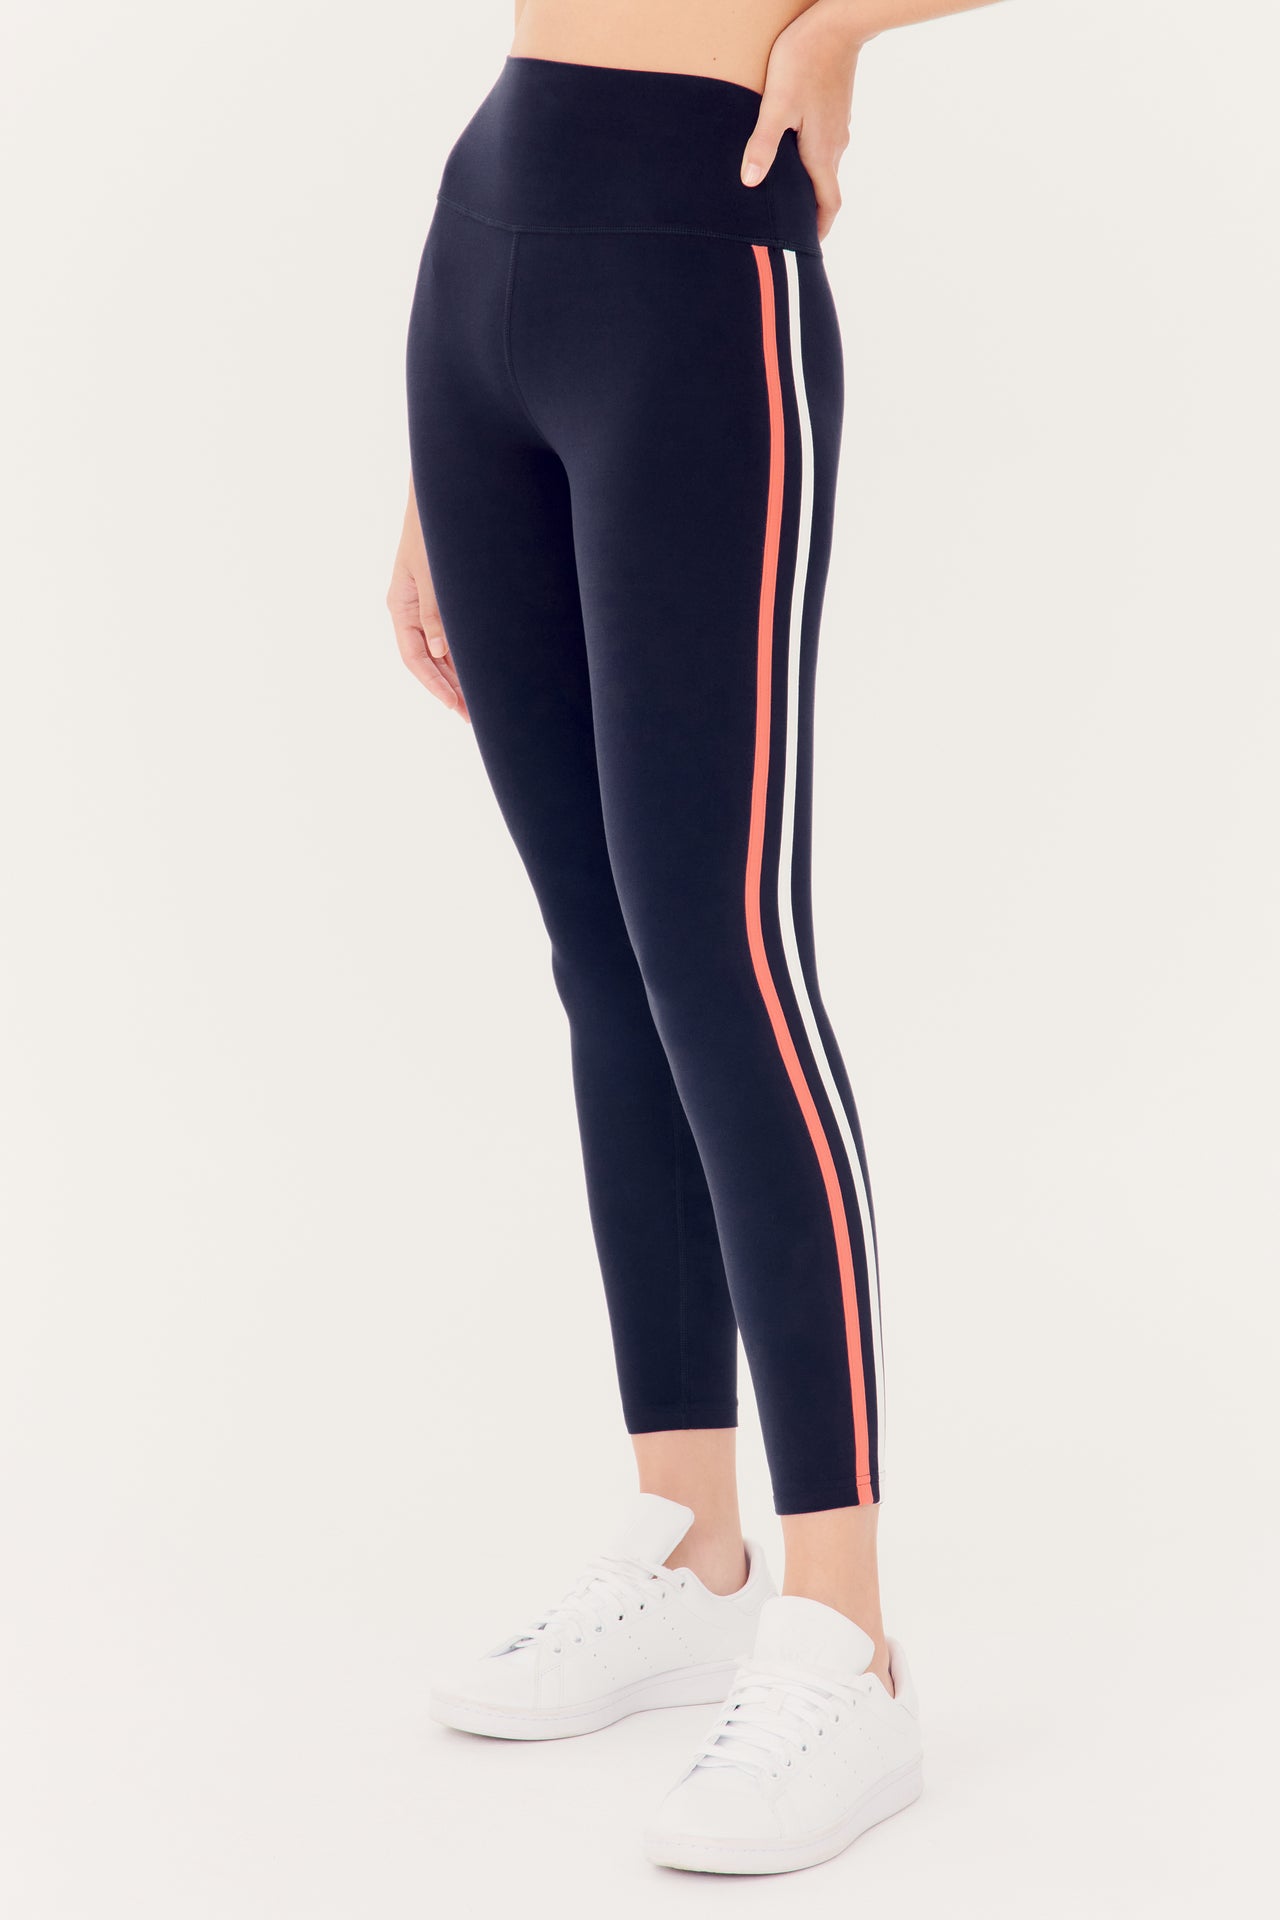 A person standing sideways wearing SPLITS59 Ella High Waist Airweight 7/8 leggings in Indigo/Melon with a side stripe and white sneakers.